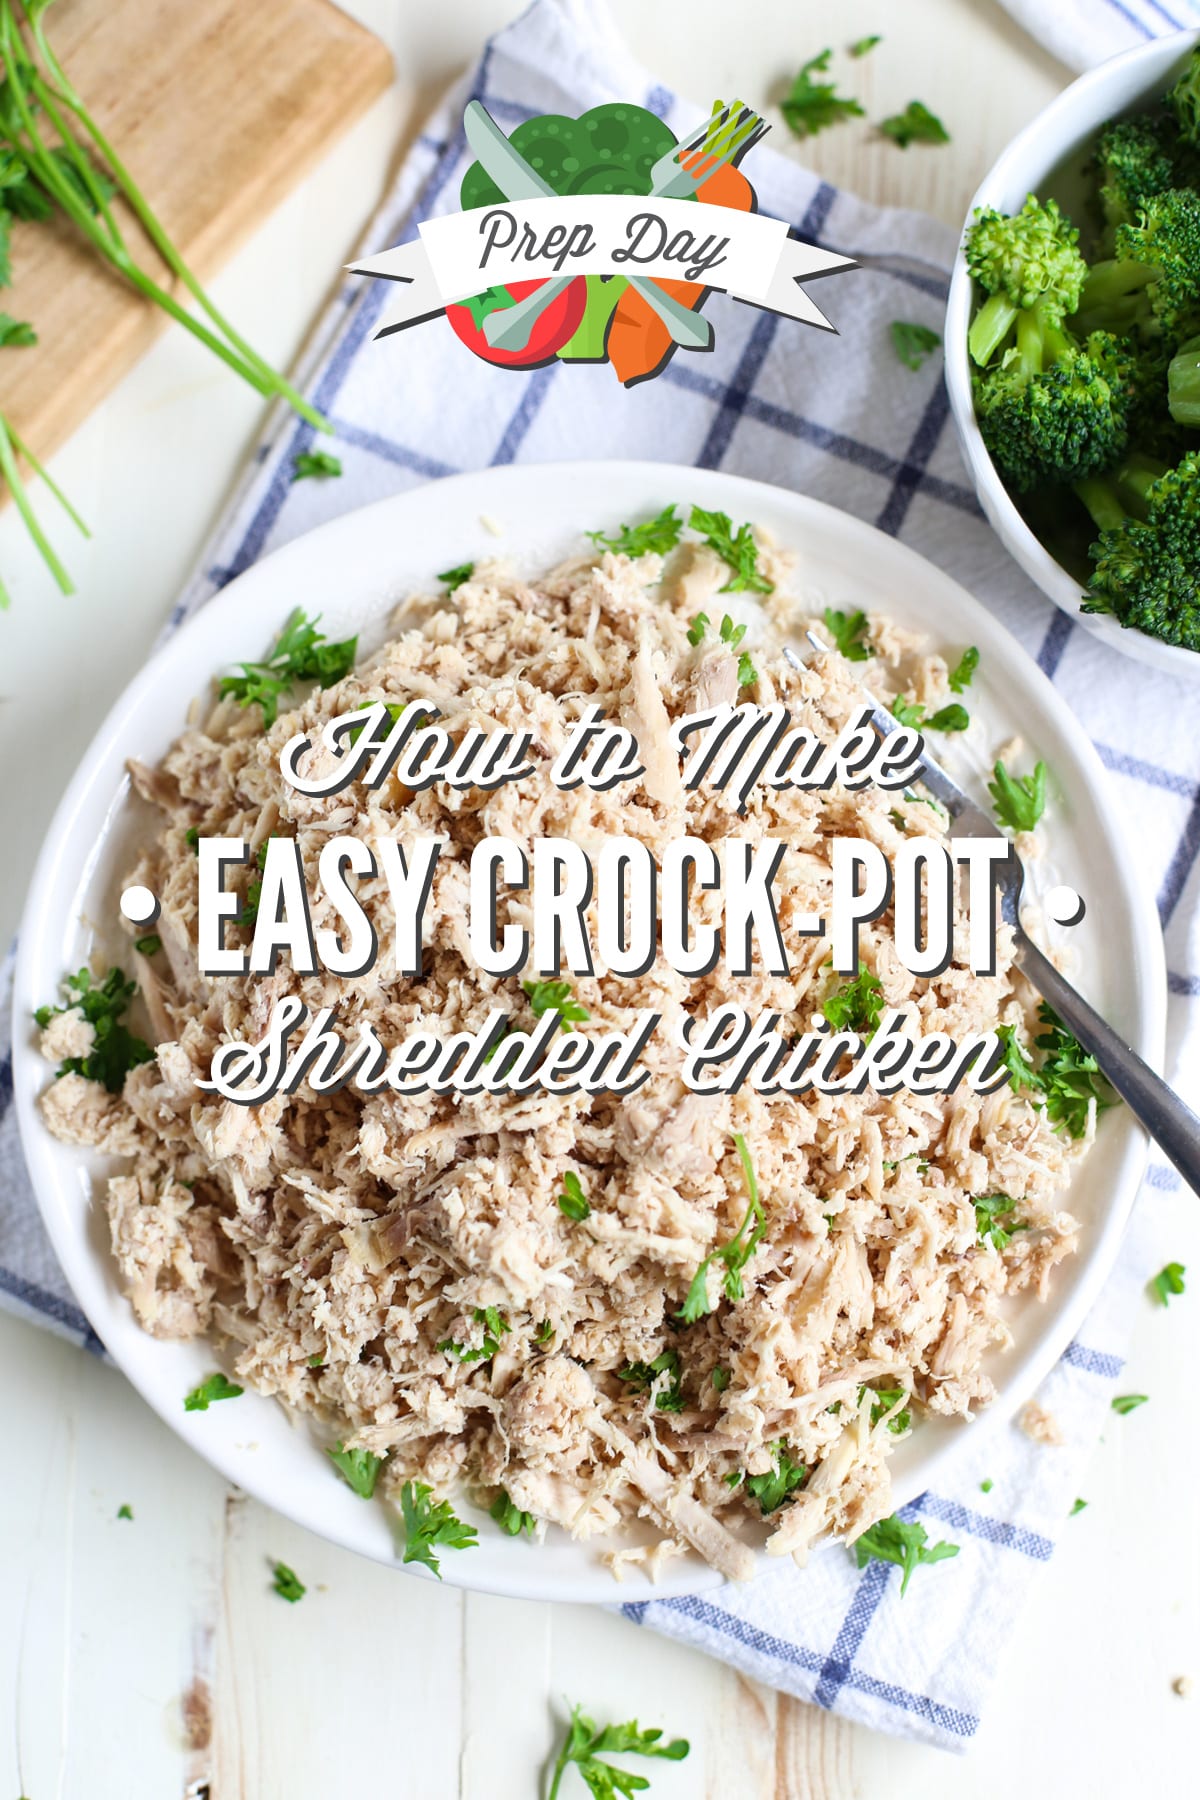 Prep Day: How to Make Easy Crock-Pot Shredded Chicken Using a Whole Chicken